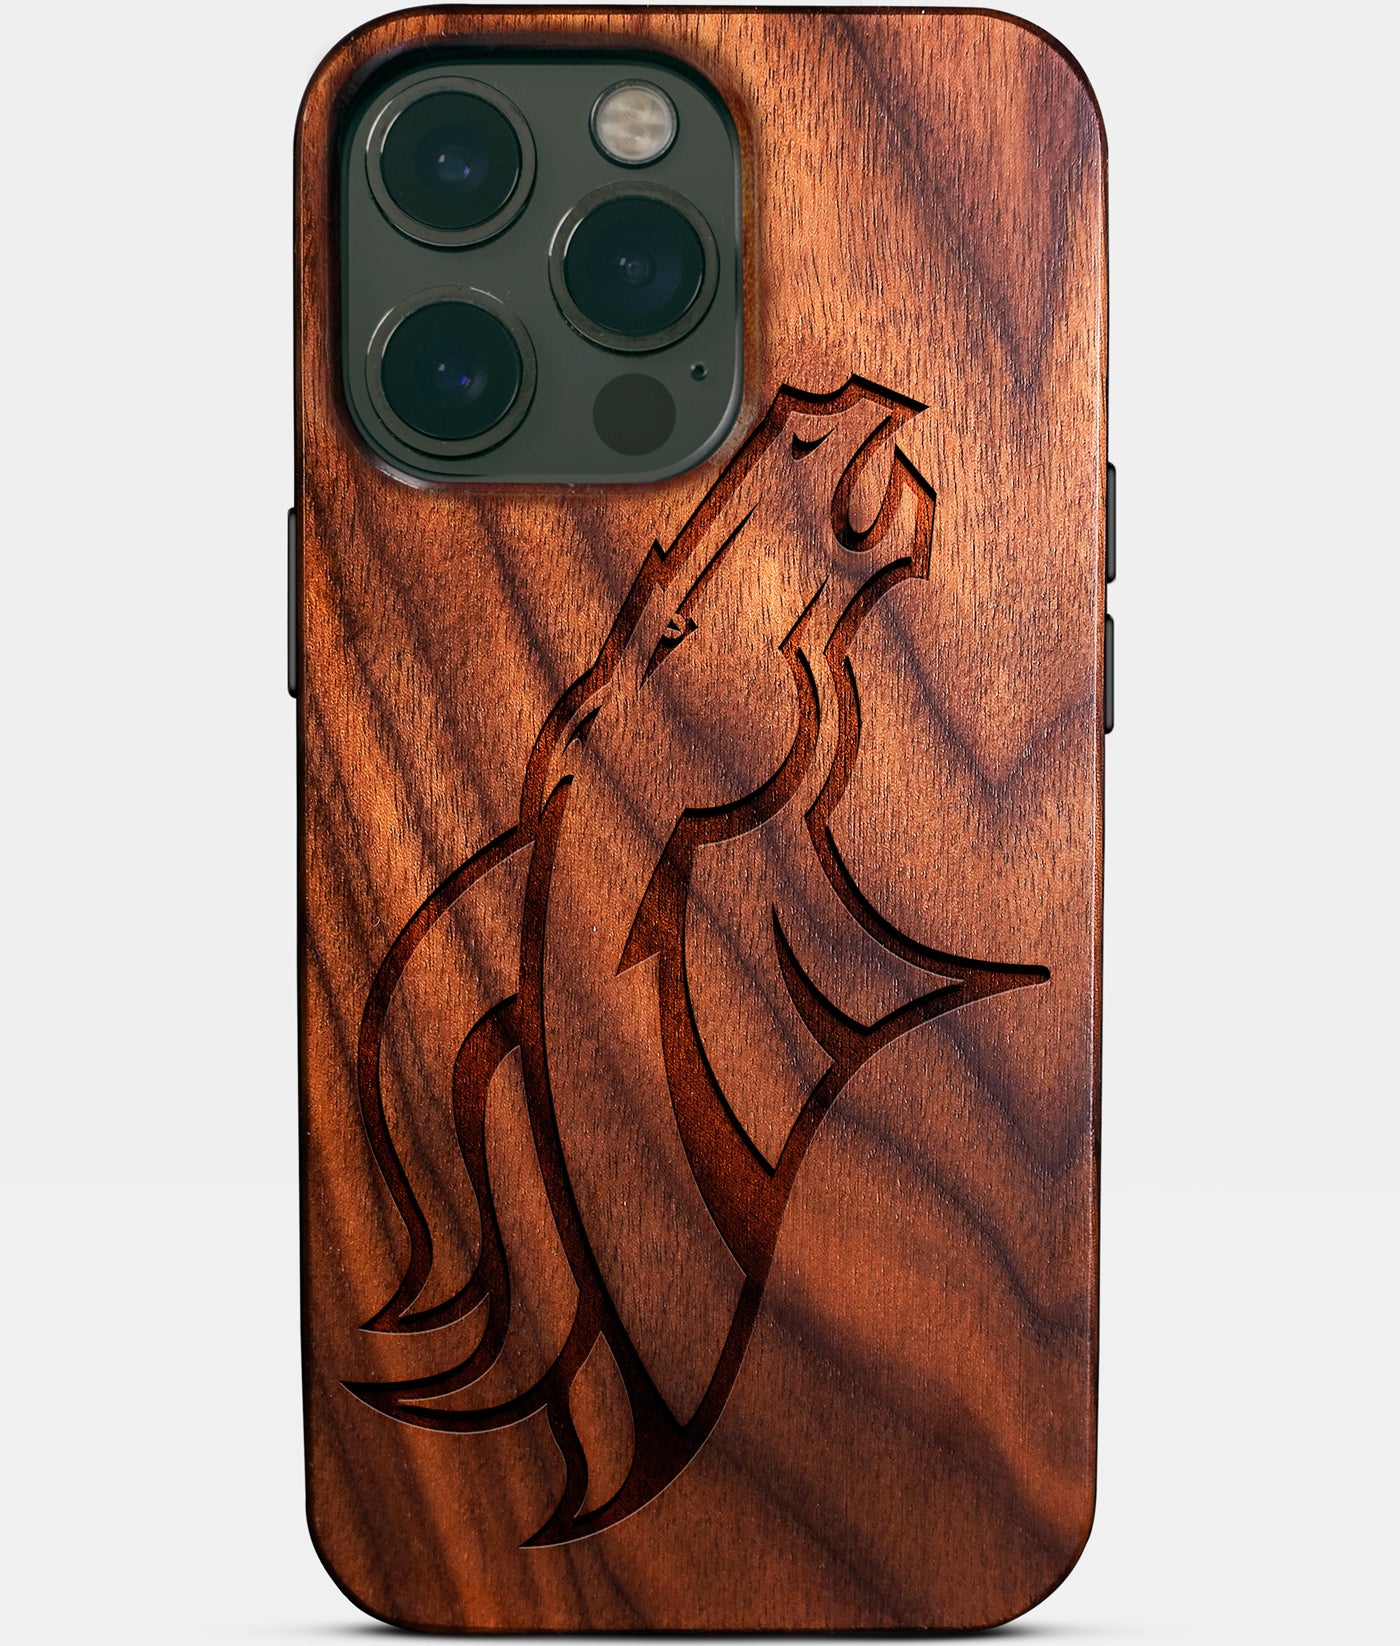 Custom Denver Broncos iPhone 14/14 Pro/14 Pro Max/14 Plus Case - Carved Wood Broncos Cover - Eco-friendly Denver Broncos iPhone 14 Case - Custom Denver Broncos Gift For Him - Monogrammed Personalized iPhone 14 Cover By Engraved In Nature